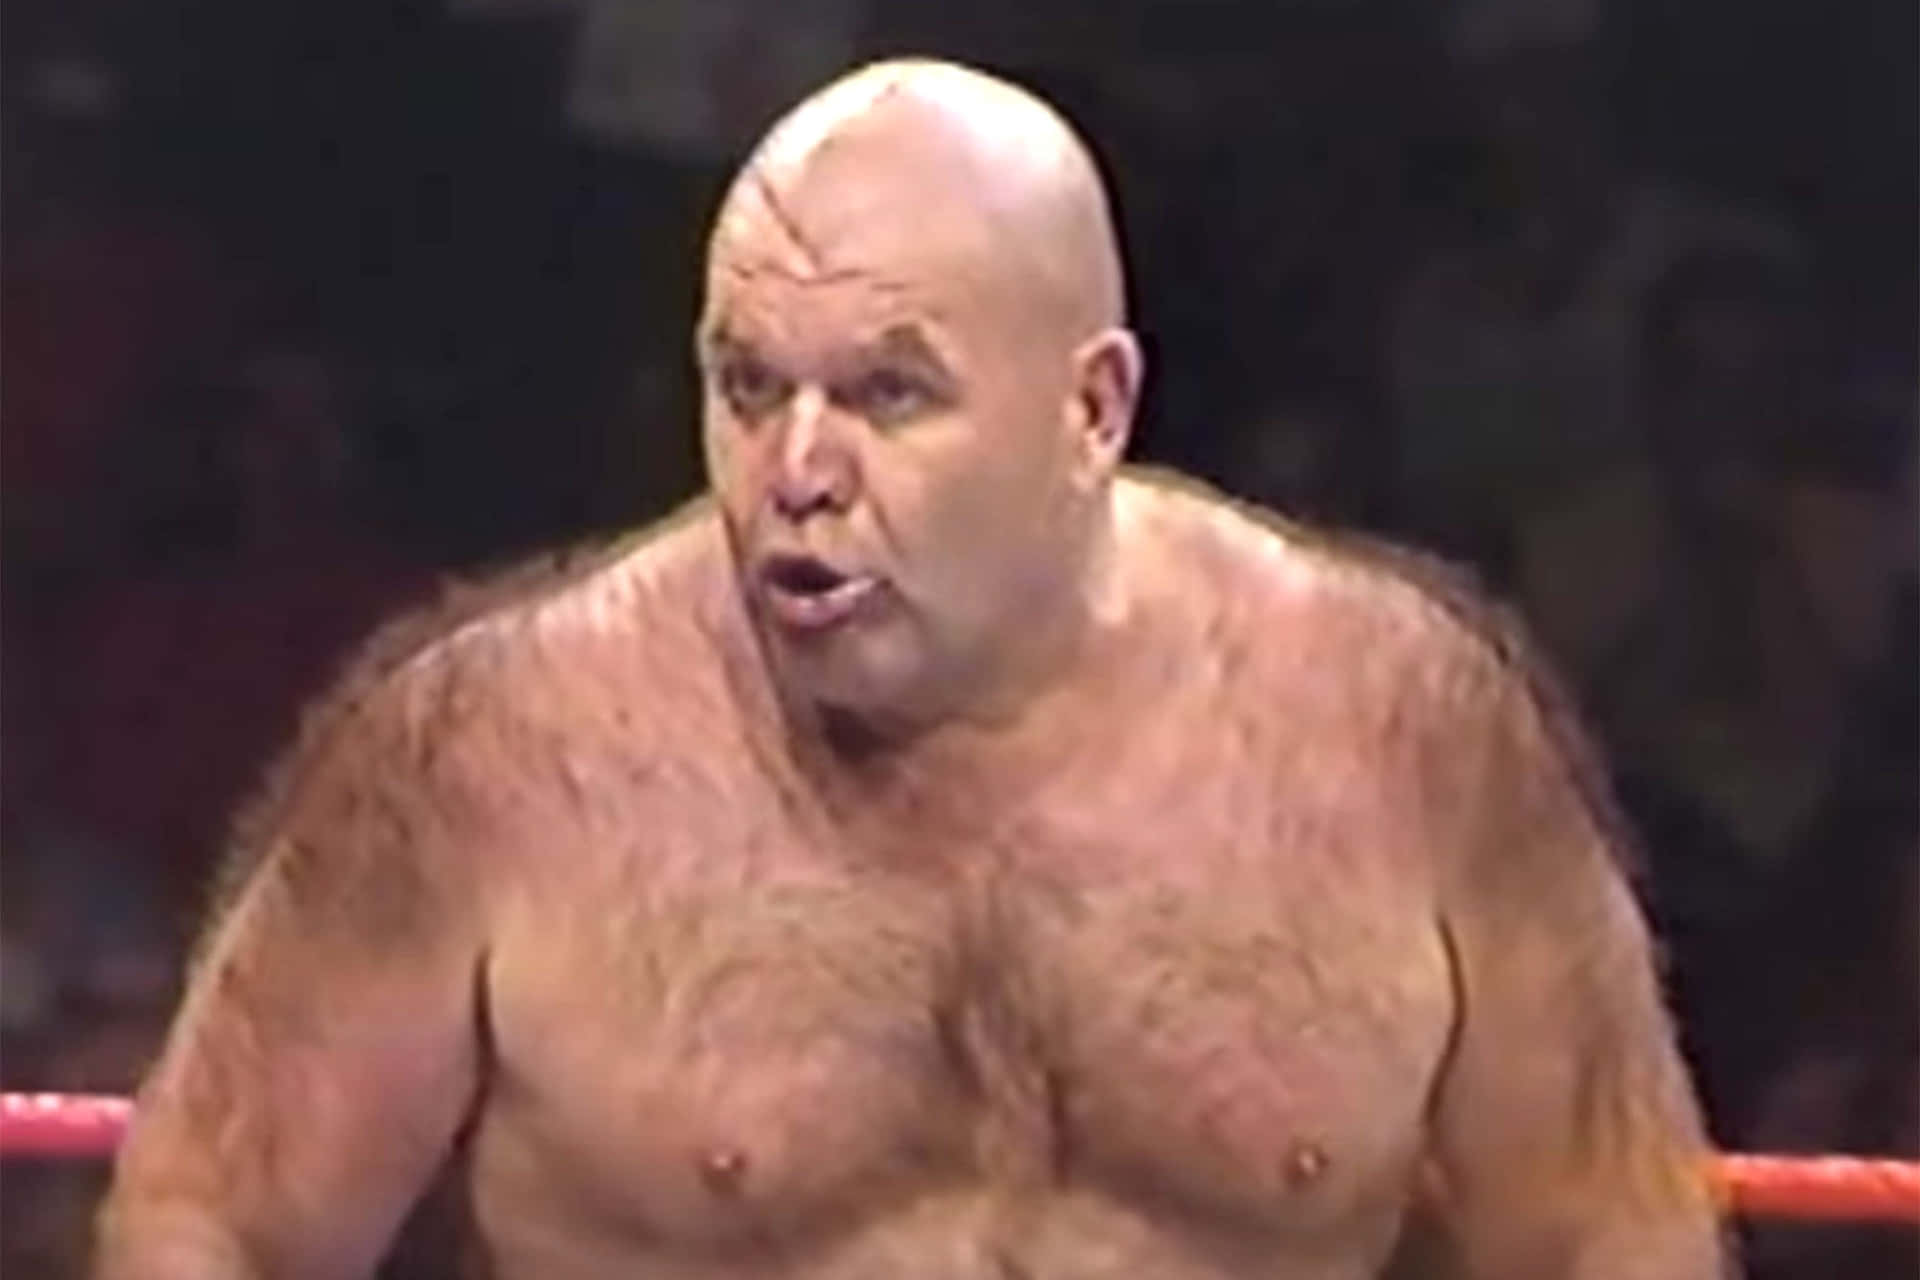 Hairy Physique Of George Steele Wallpaper